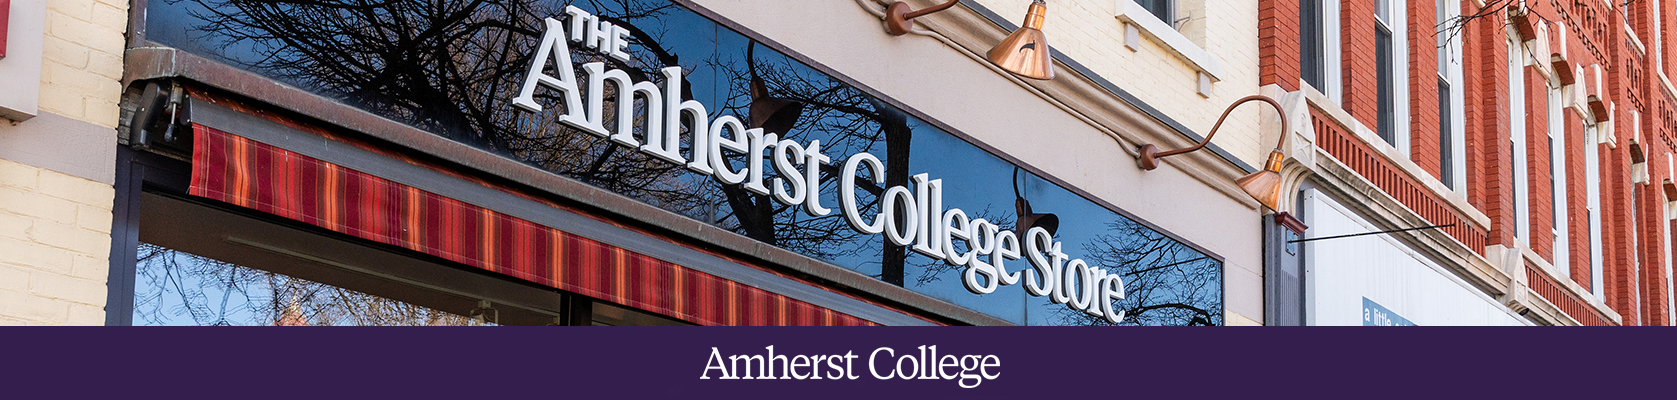 The Amherst College Store front window.